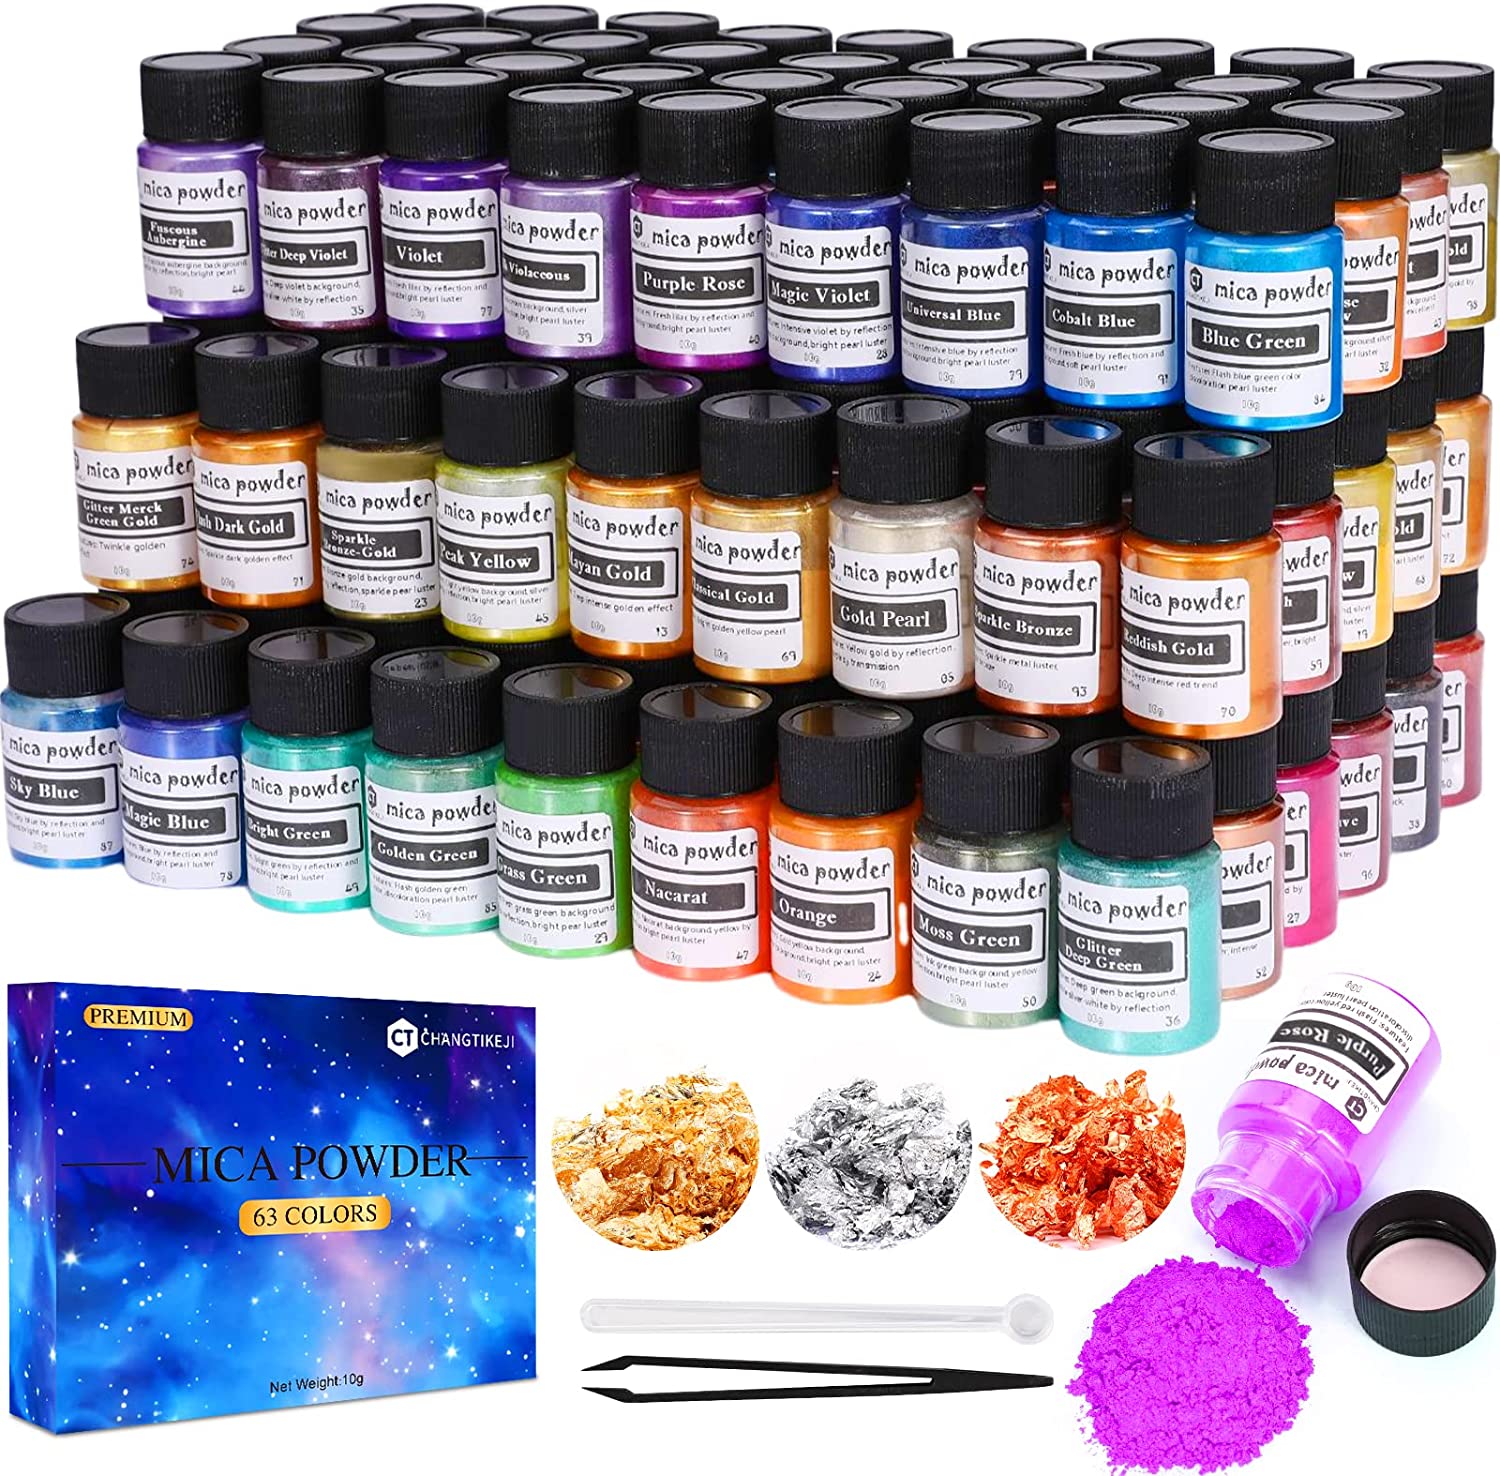 BALTIC DAY 100 Colors - 10 Chameleon Mica Powder for Epoxy Resin 10g/Bottle  - Resin Colorant for Lip Gloss, Soap Making, Candle, Nail, Bath Bomb